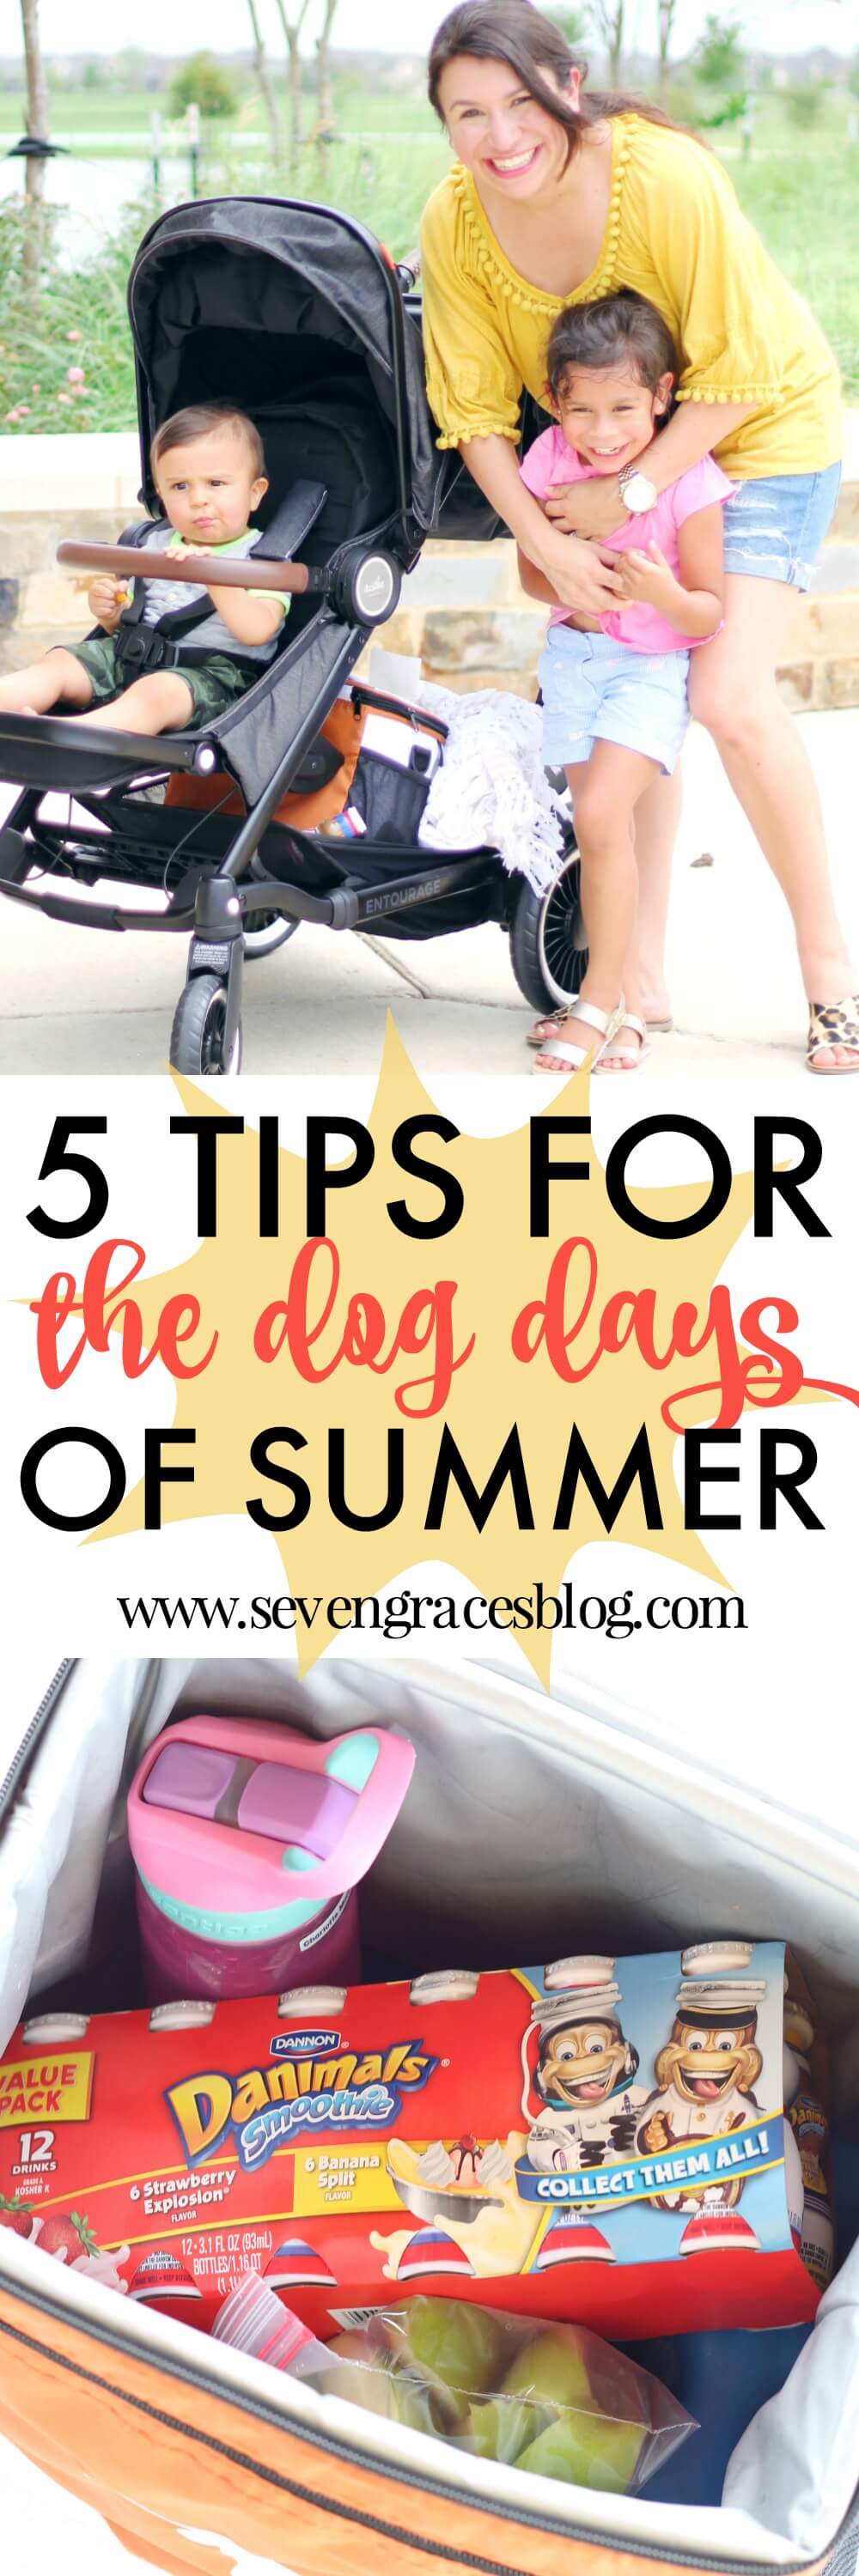 5 Tips for the Dog Days of Summer: What you need to get you through the last stretch of summer days with kids.